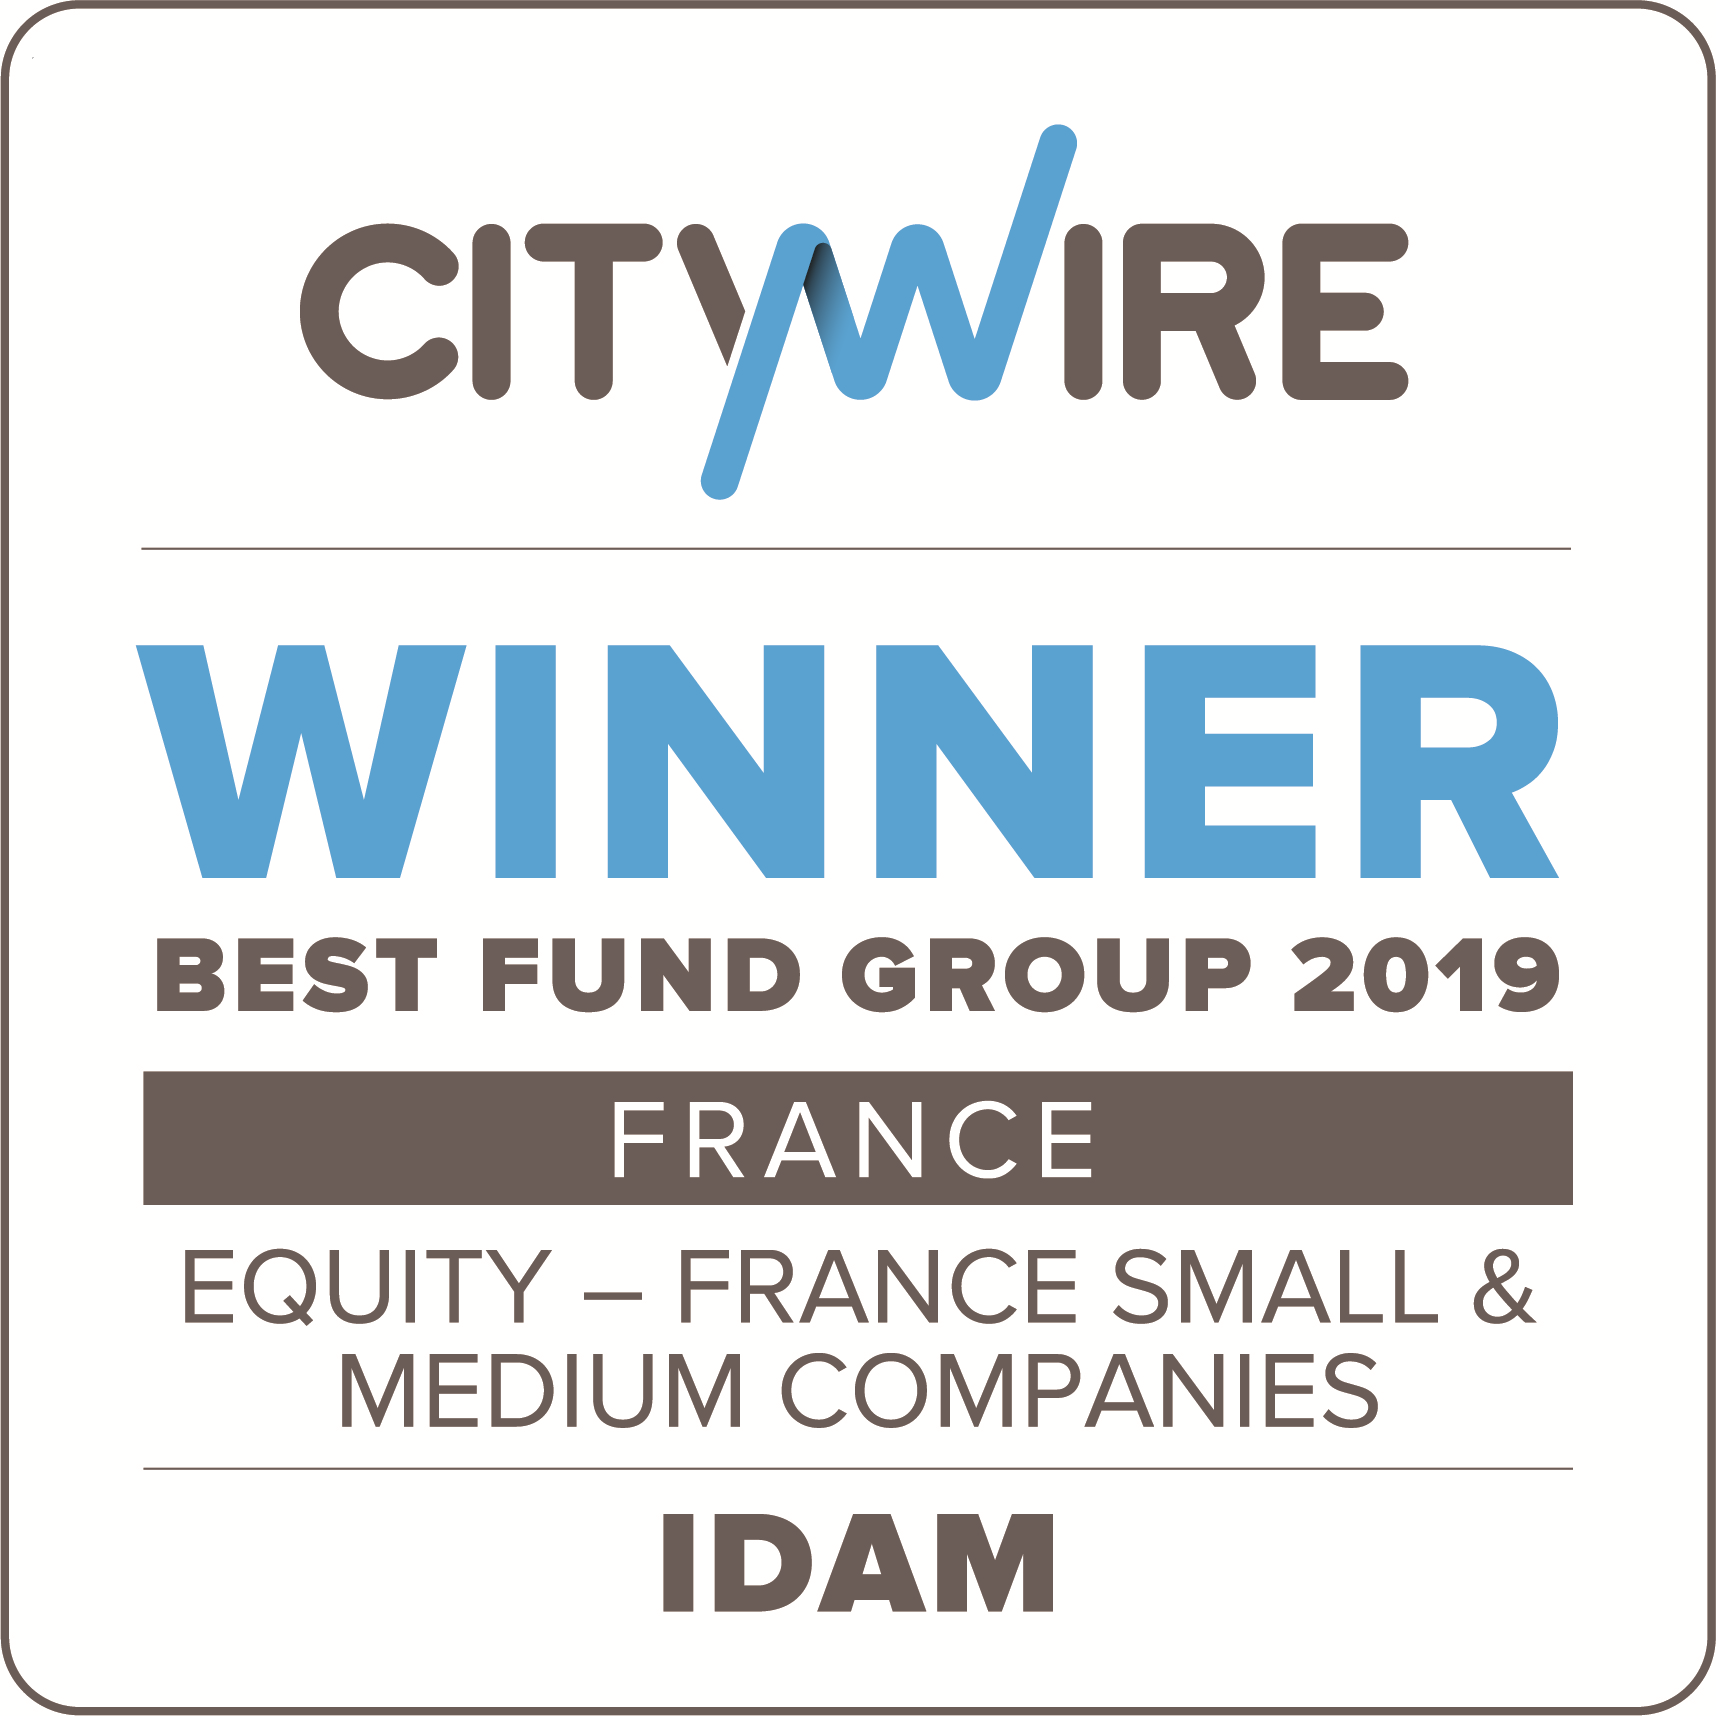 france eq-f-sm-med-cos idam-2019 citywire outline-002-1